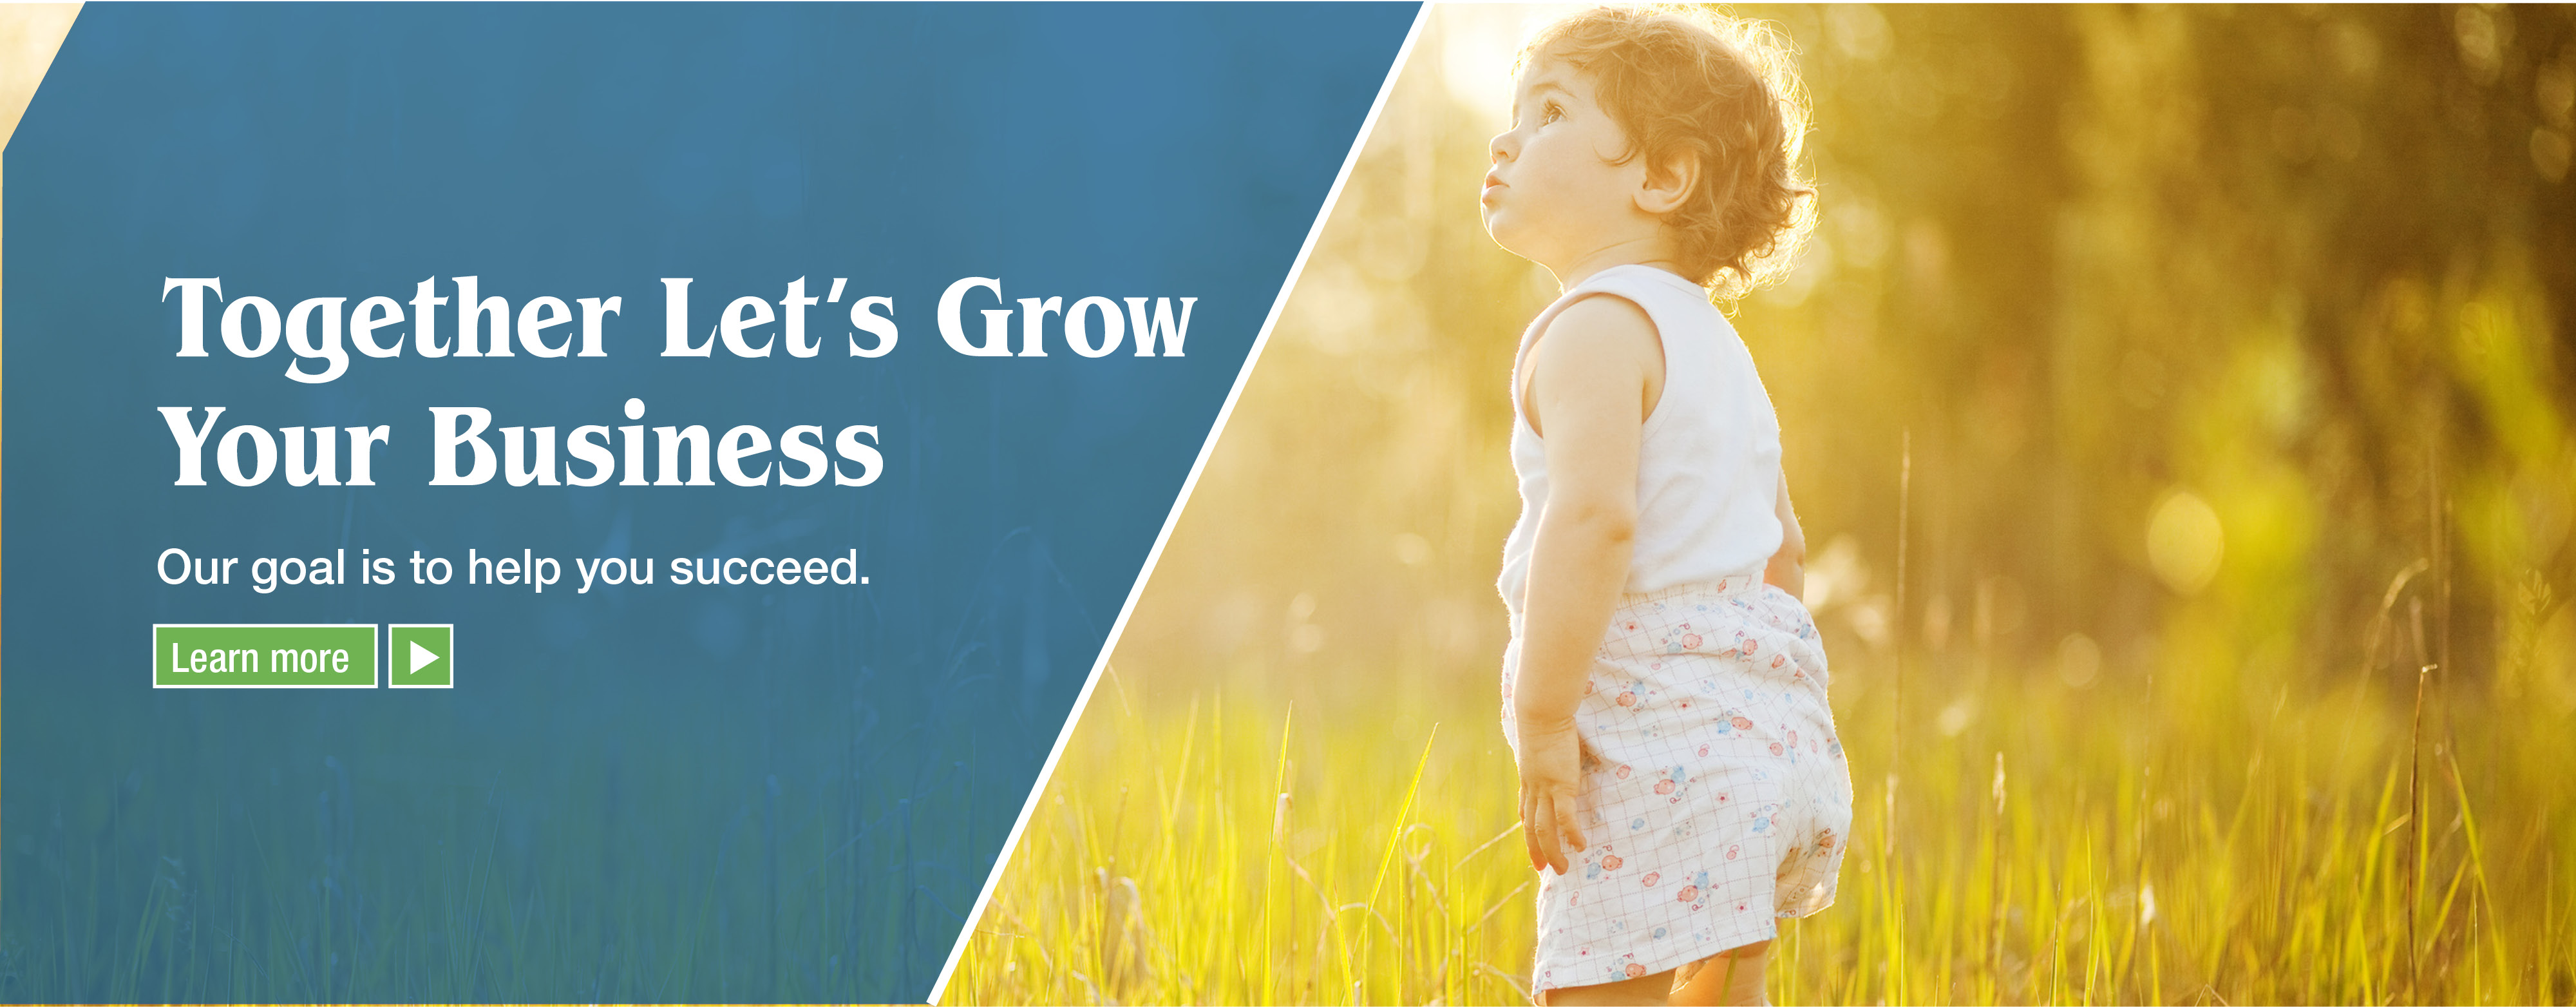 Together Let’s Grow Your Business: Our goal is to help you succeed. Find out how.